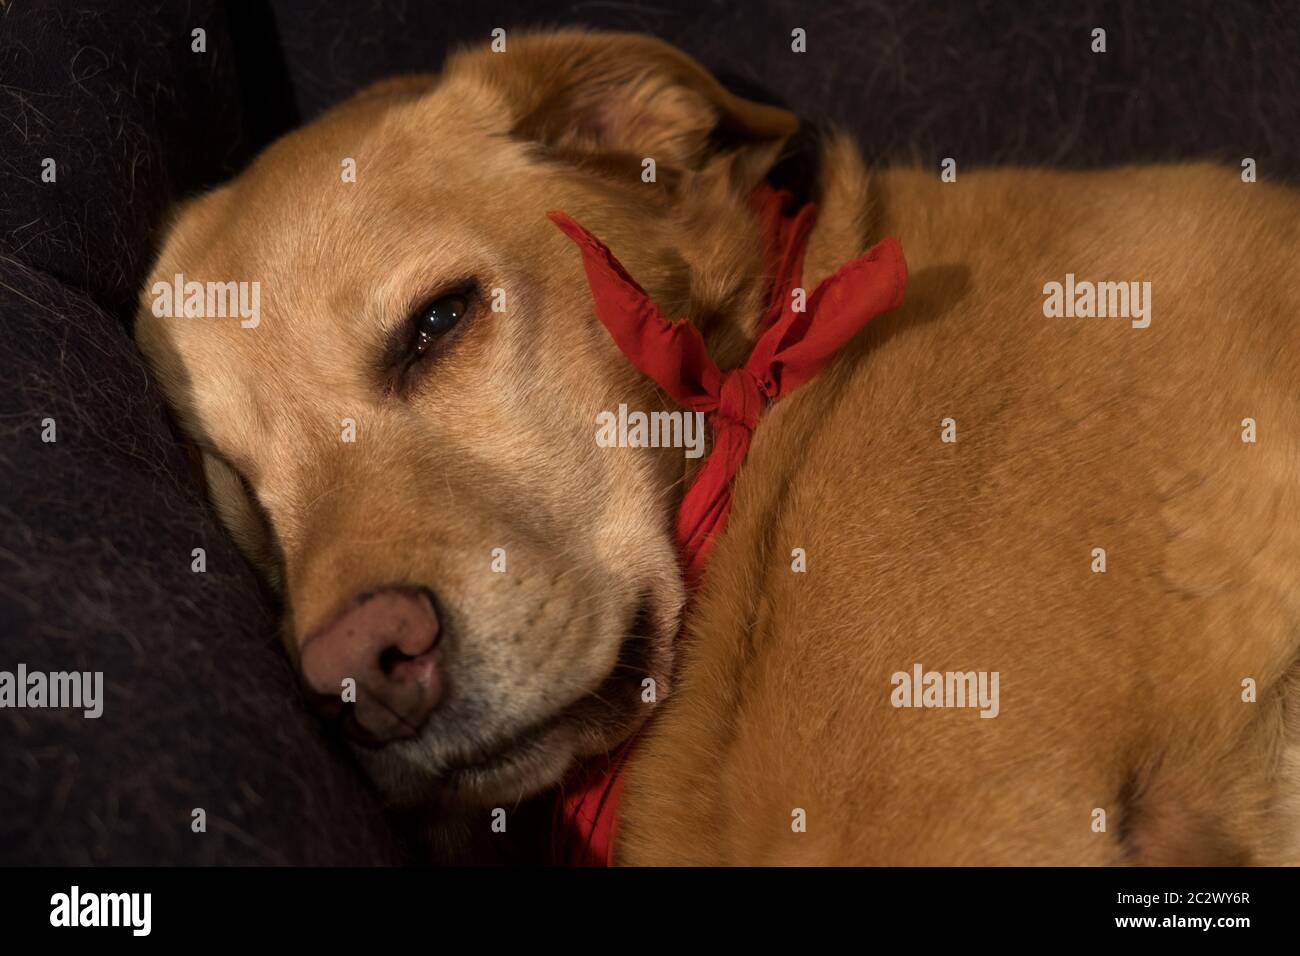 A labrador mixed-breed feels sleepy after a long walk. She can hardly open her eyes while looking at the photographer and is lying down comfortably. Stock Photo